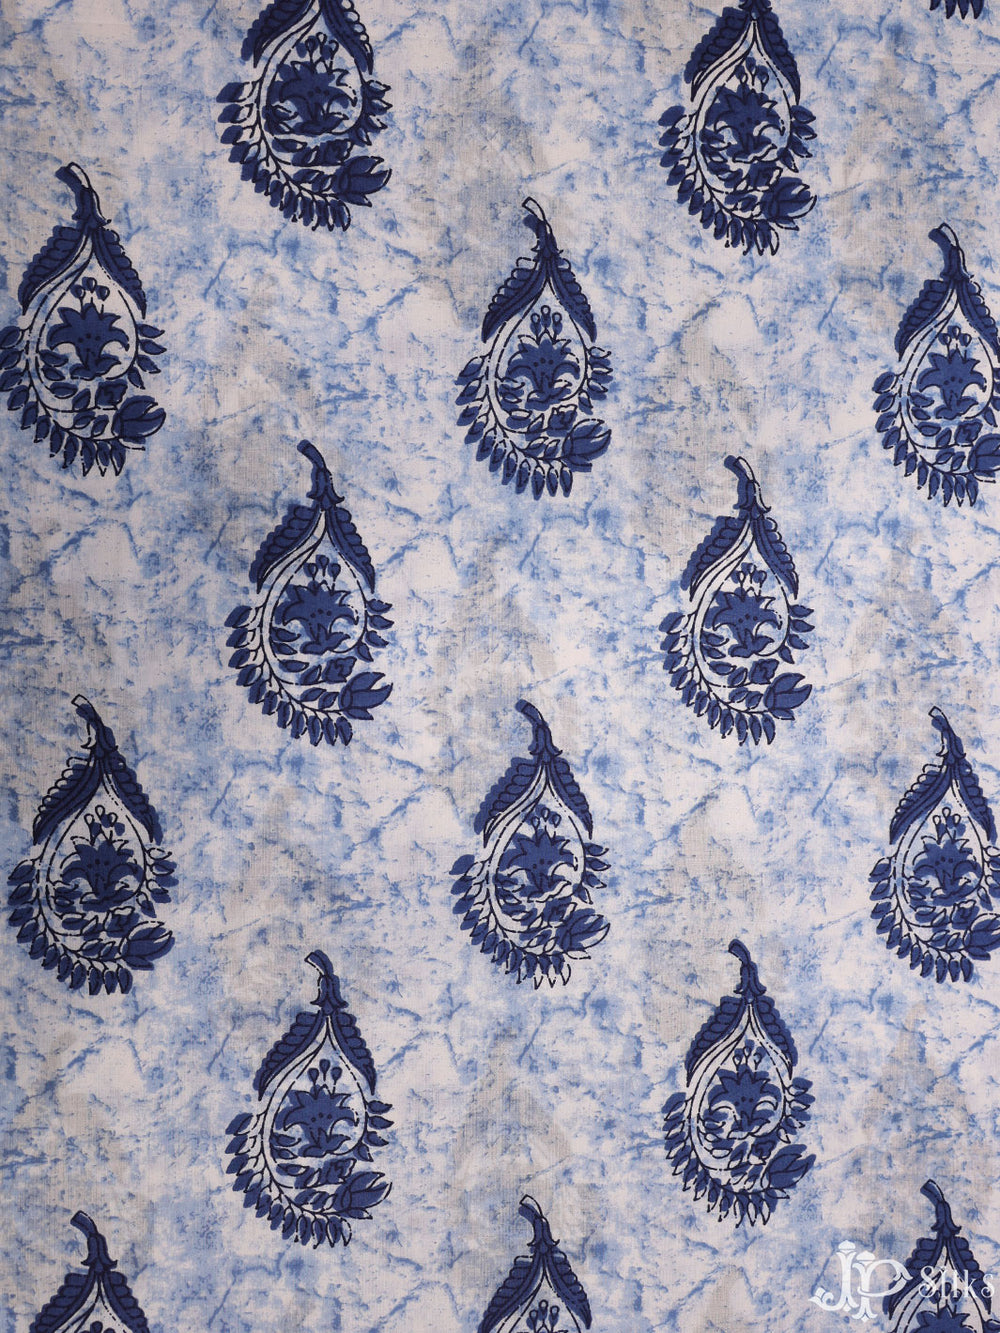 Blue and White Digital Printed Cotton Fabric - D1765 - View 1